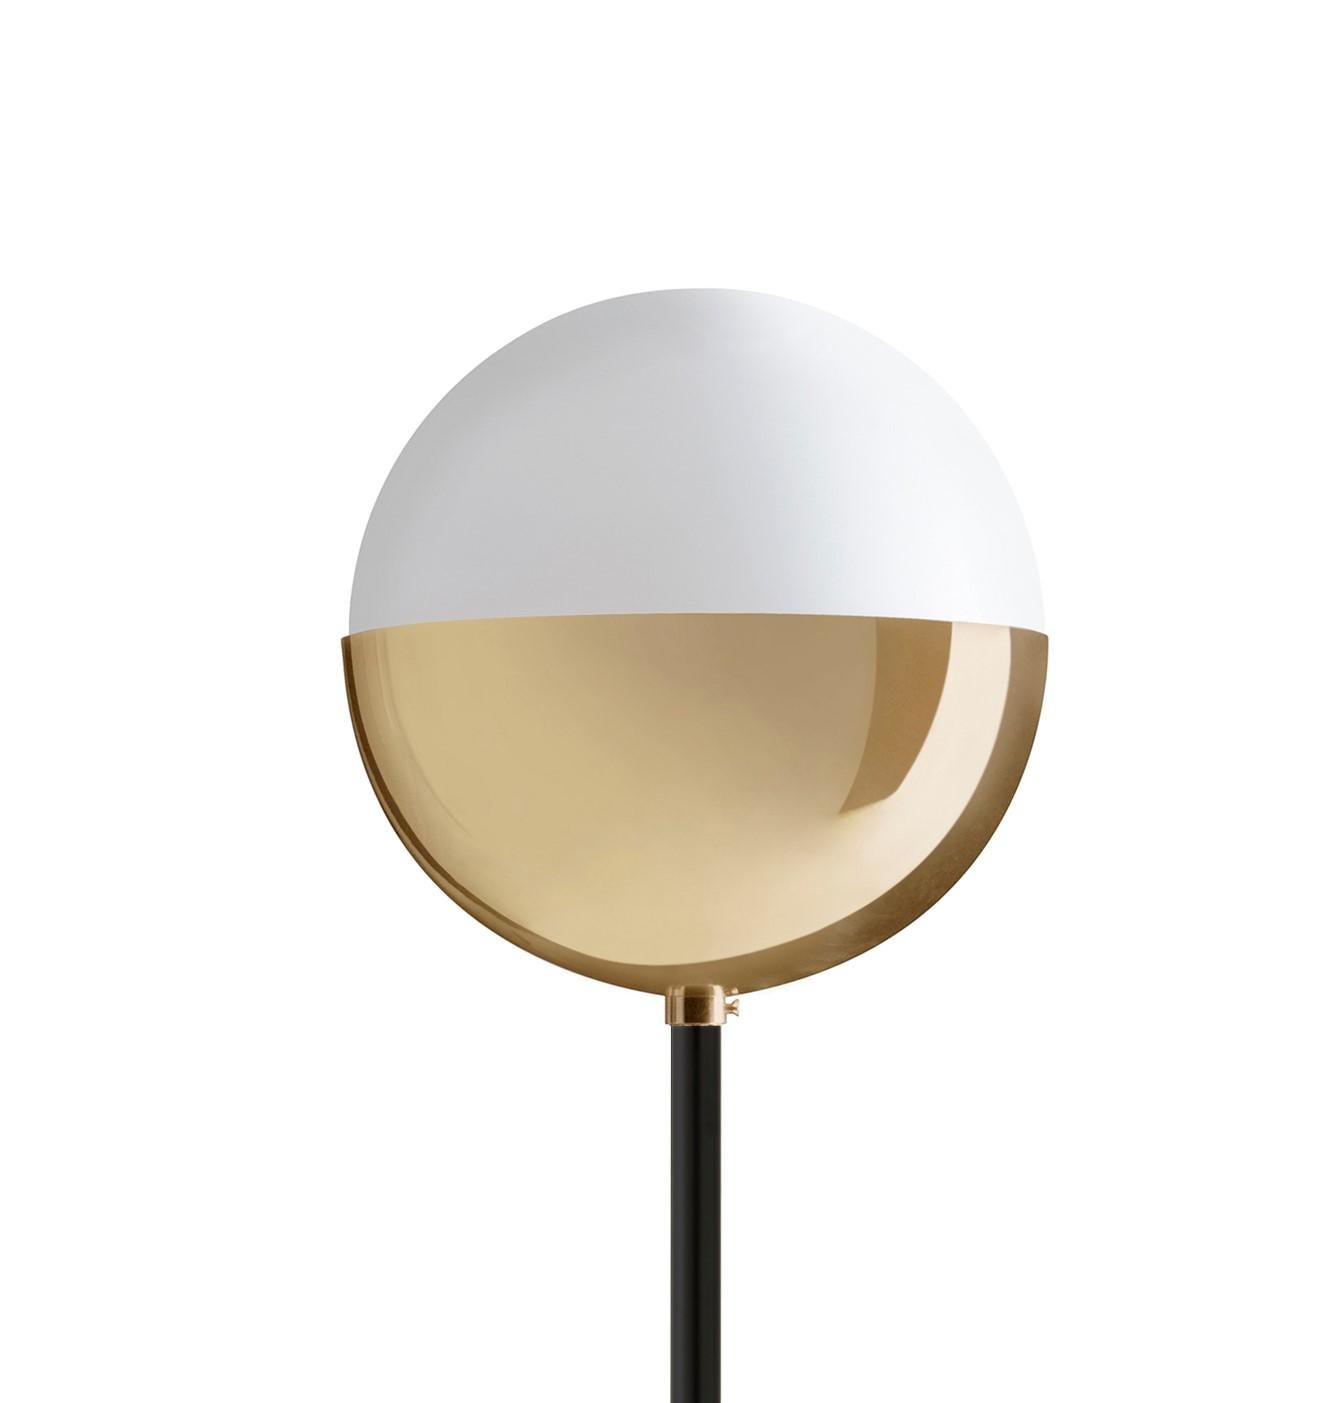 Floor lamp 01 dimmable 140 by Magic Circus Editions
Dimensions: D 25 x H 140 cm
Materials: Carrara marble base, smooth brass tube, glossy mouth blown glass
Non-Dimmable version available.


Rethinking, reimagining, redesigning familiar objects